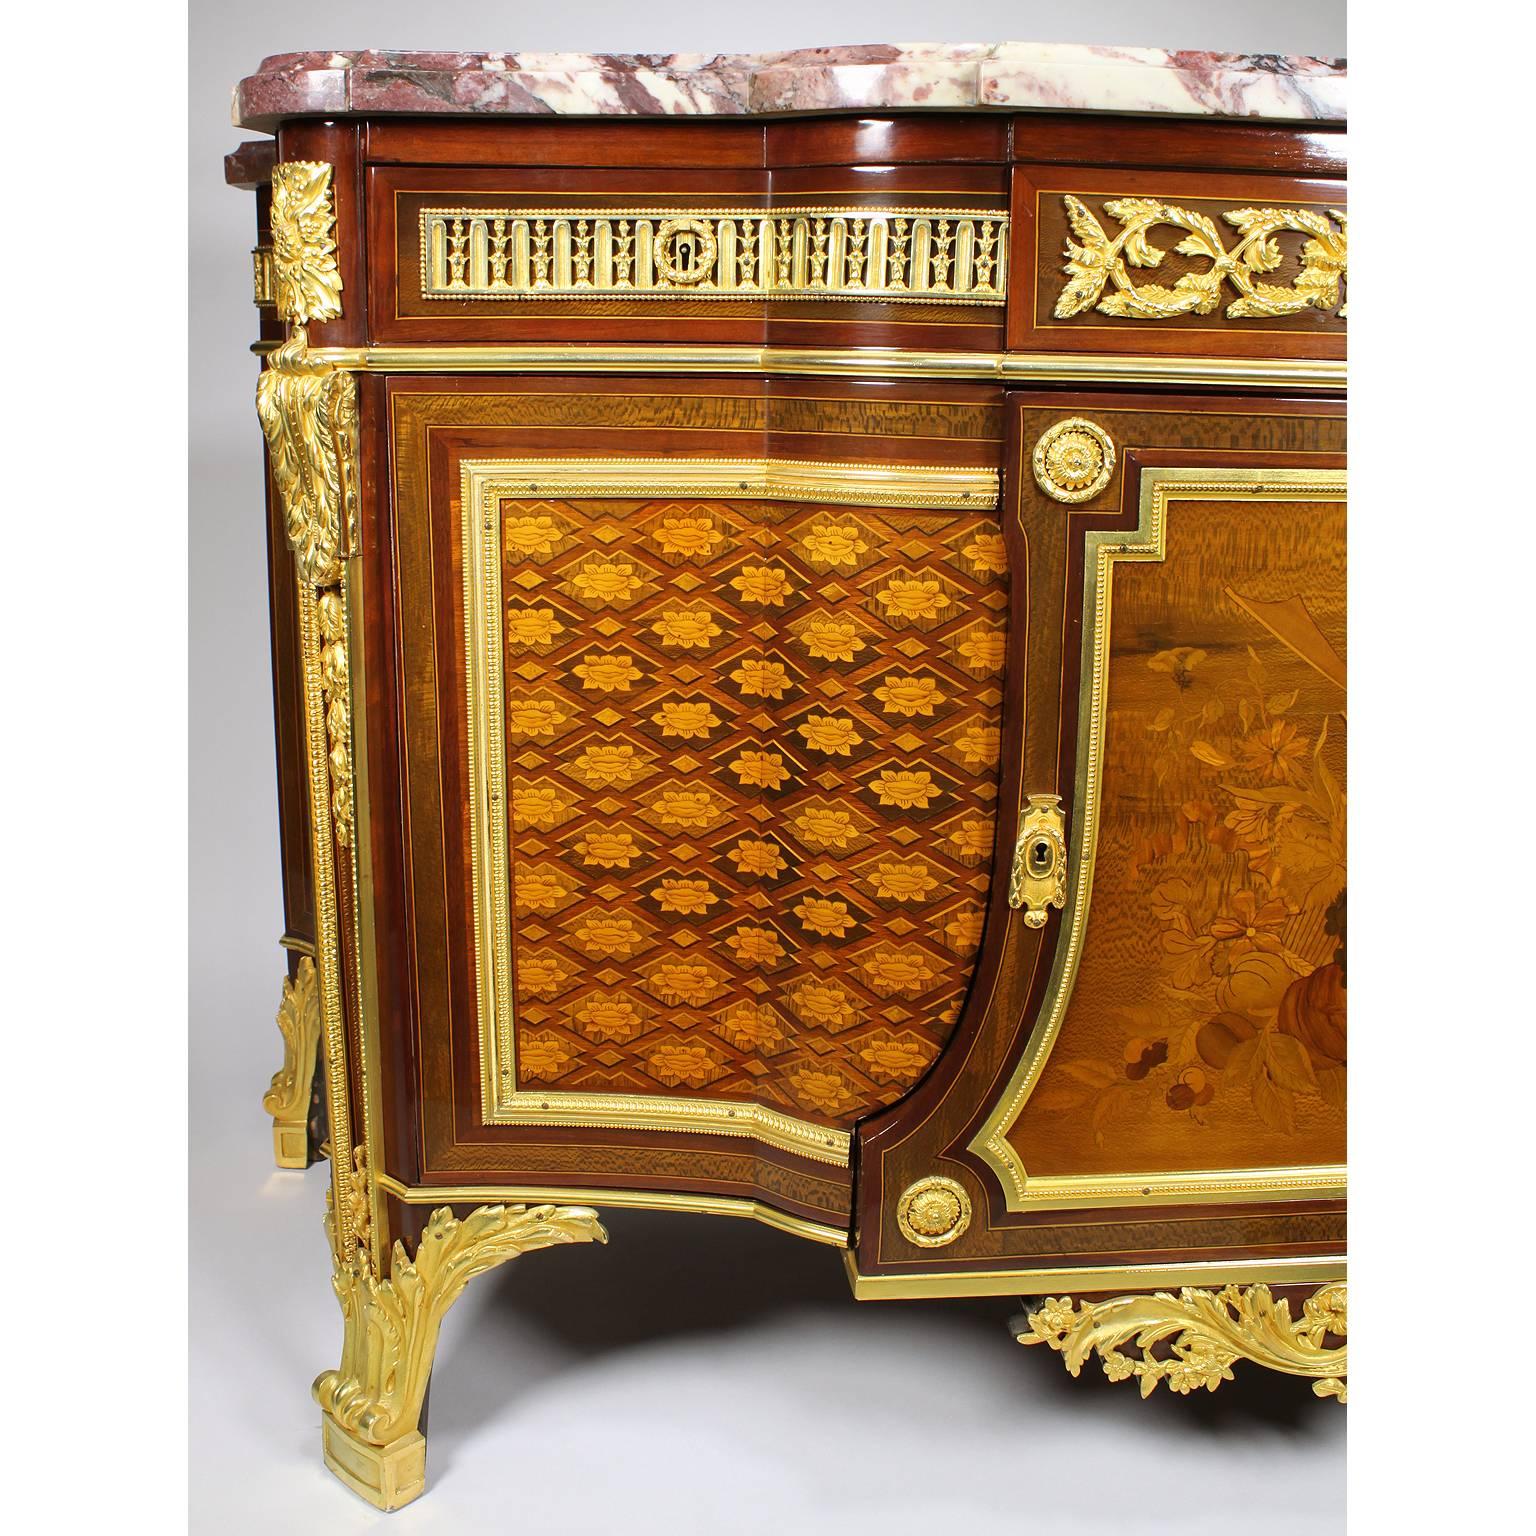 A fine French 19th century Louis XVI style ormolu-mounted mahogany, fruitwood and sycamore marquetry and parquetry commode with a Brèche Violette marble-top, after the model by Jean-Henri Riesener (1734-1806), circa 1880. The finely detailed commode